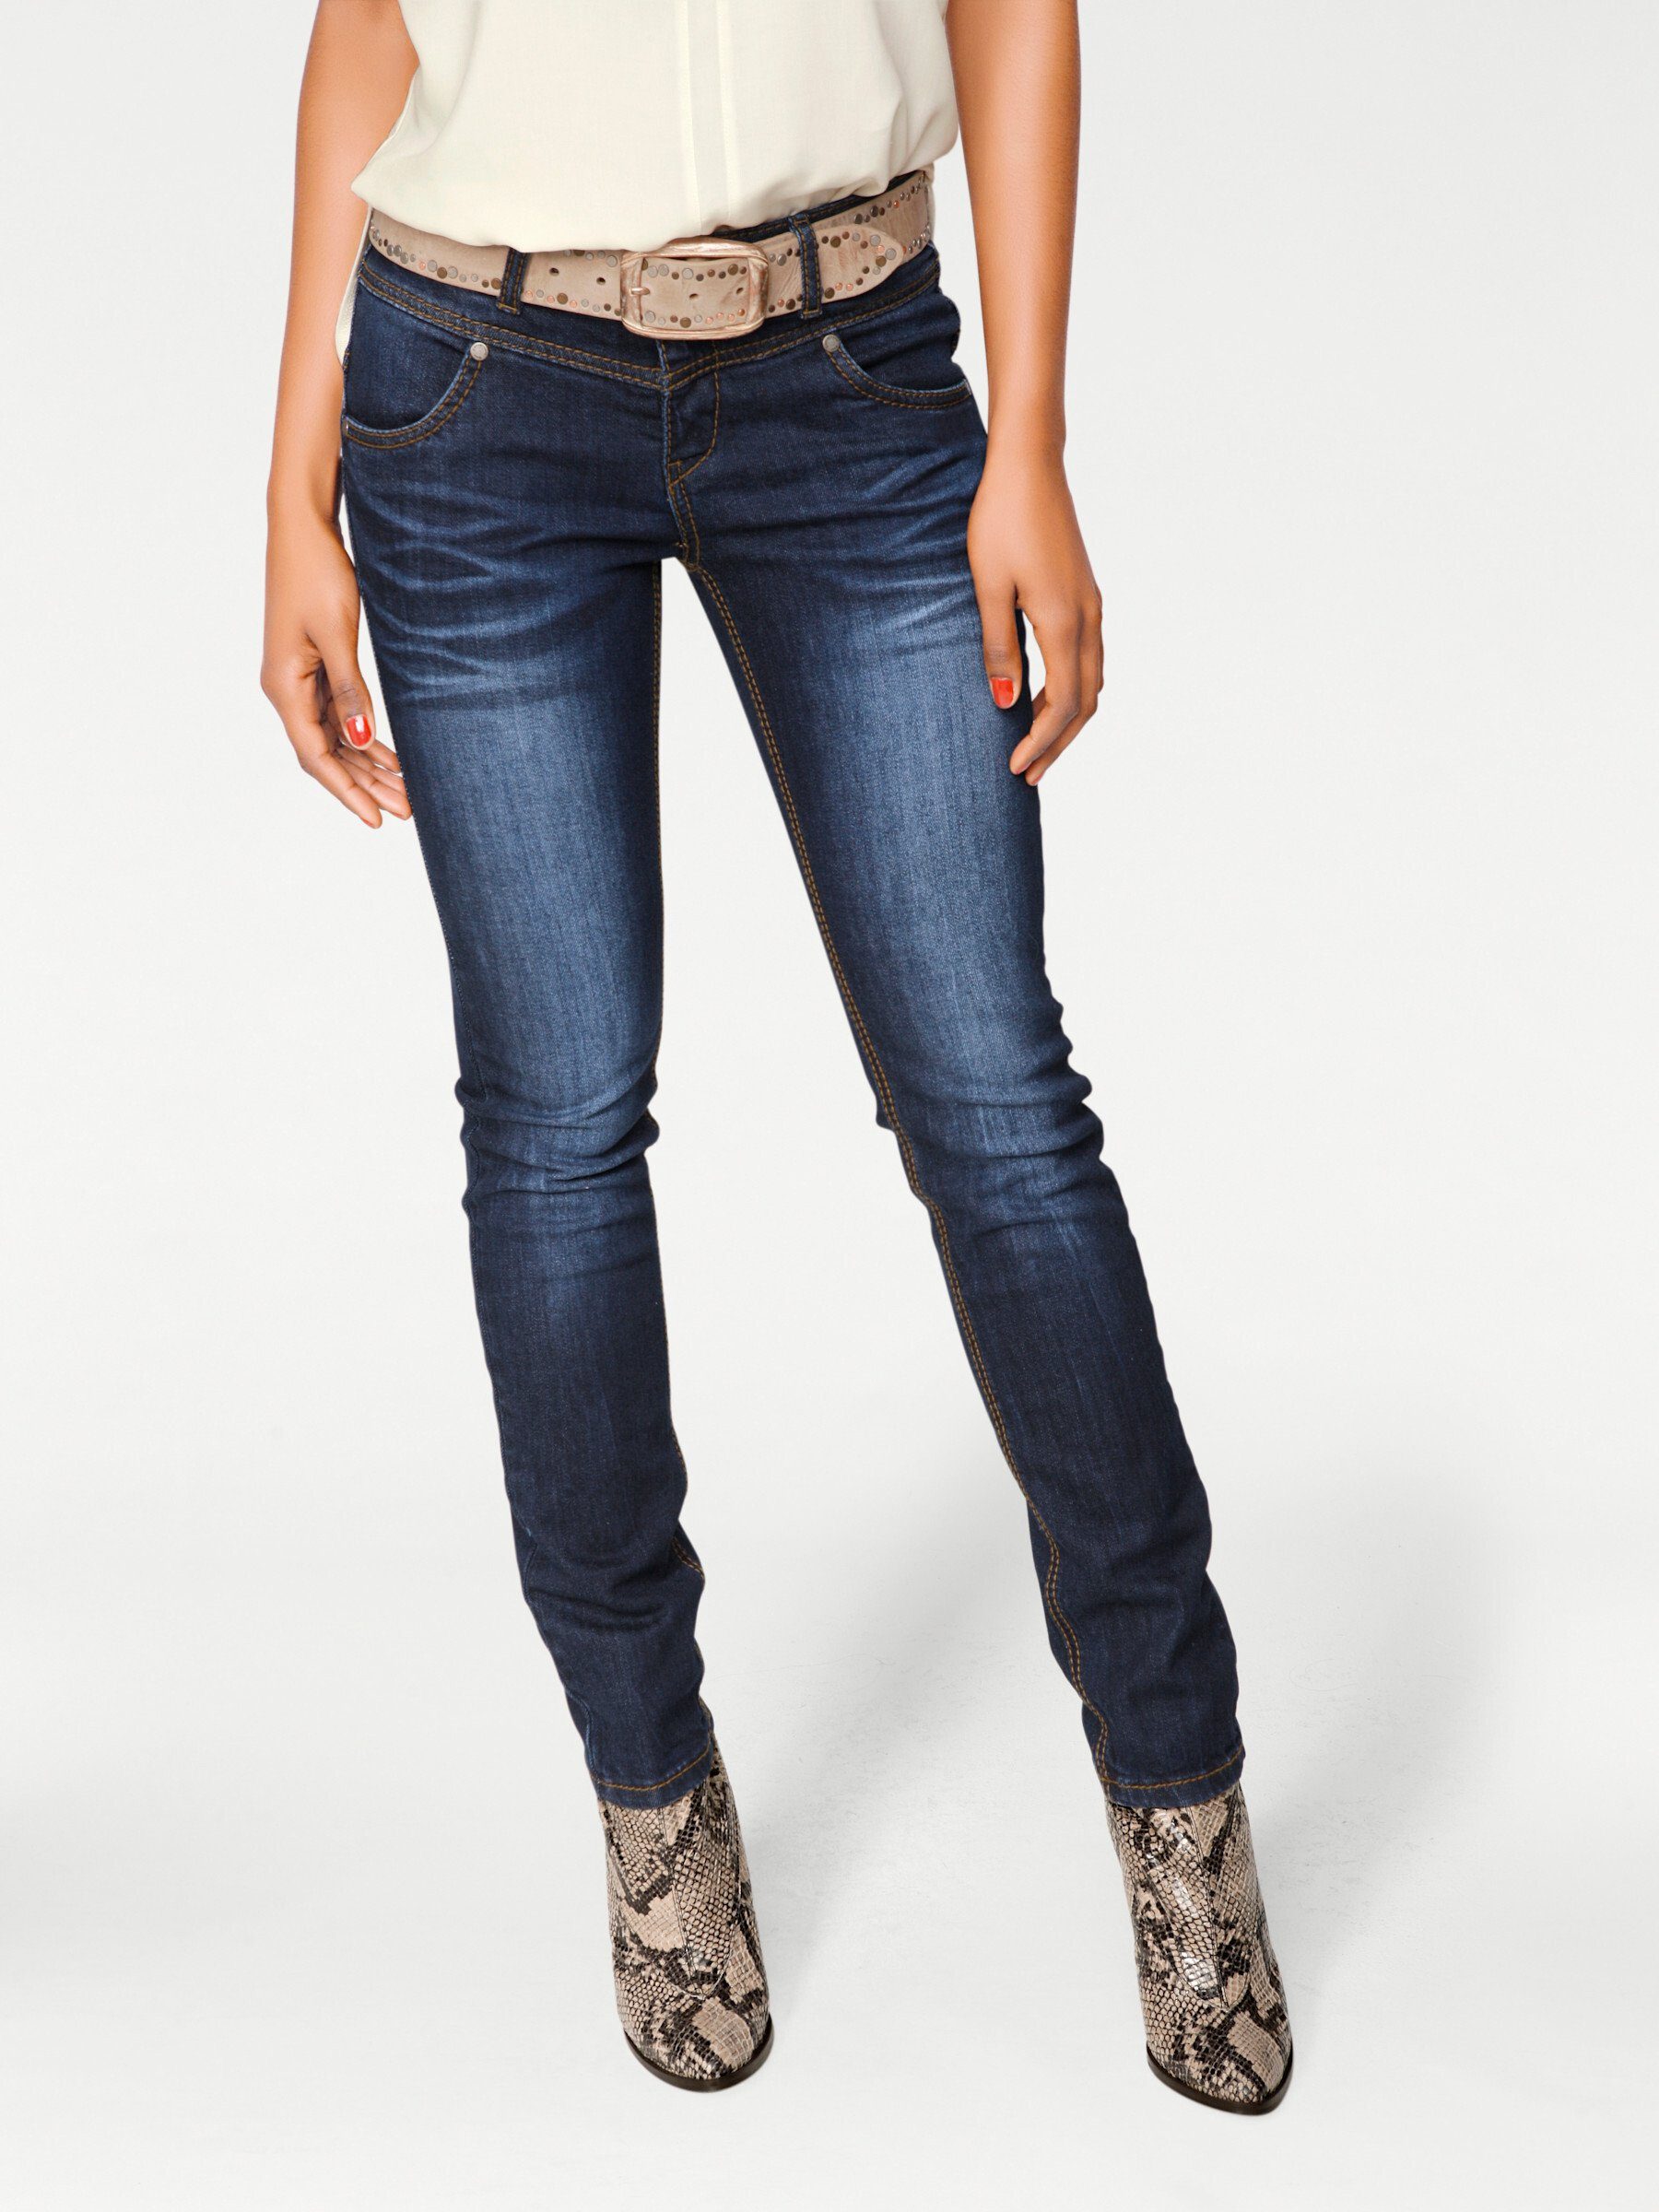 heine Bequeme Jeans Skinny-Jeans